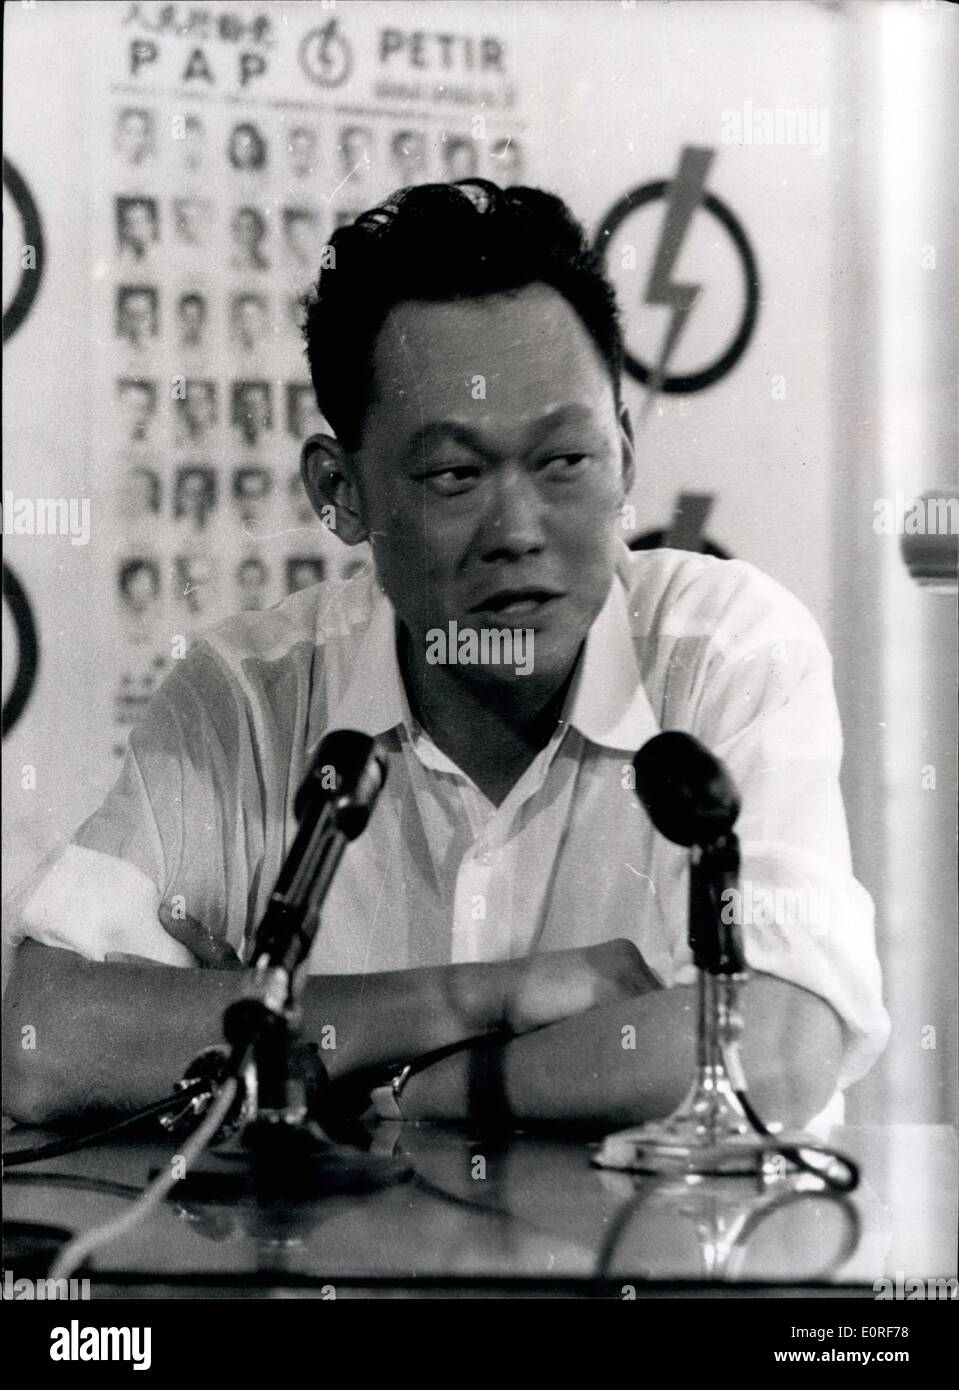 Jun. 06, 1959 - People's Action Party Gives First Press Conference in Singapore: The people's Action party, which had a sweeping victory in the recent Singapore general election, gave their first press conference at it's headquarters in Singapore on Monday. At the conference Mr. Lee Kuan Yew, the Prime Minister designate - had said that the P.A.P. would not form a government if the Governor, Sir William Good refused to release their comrades - in Changi Jail under the Public preservation security ordinance. The sight men are now due to be release today Stock Photo